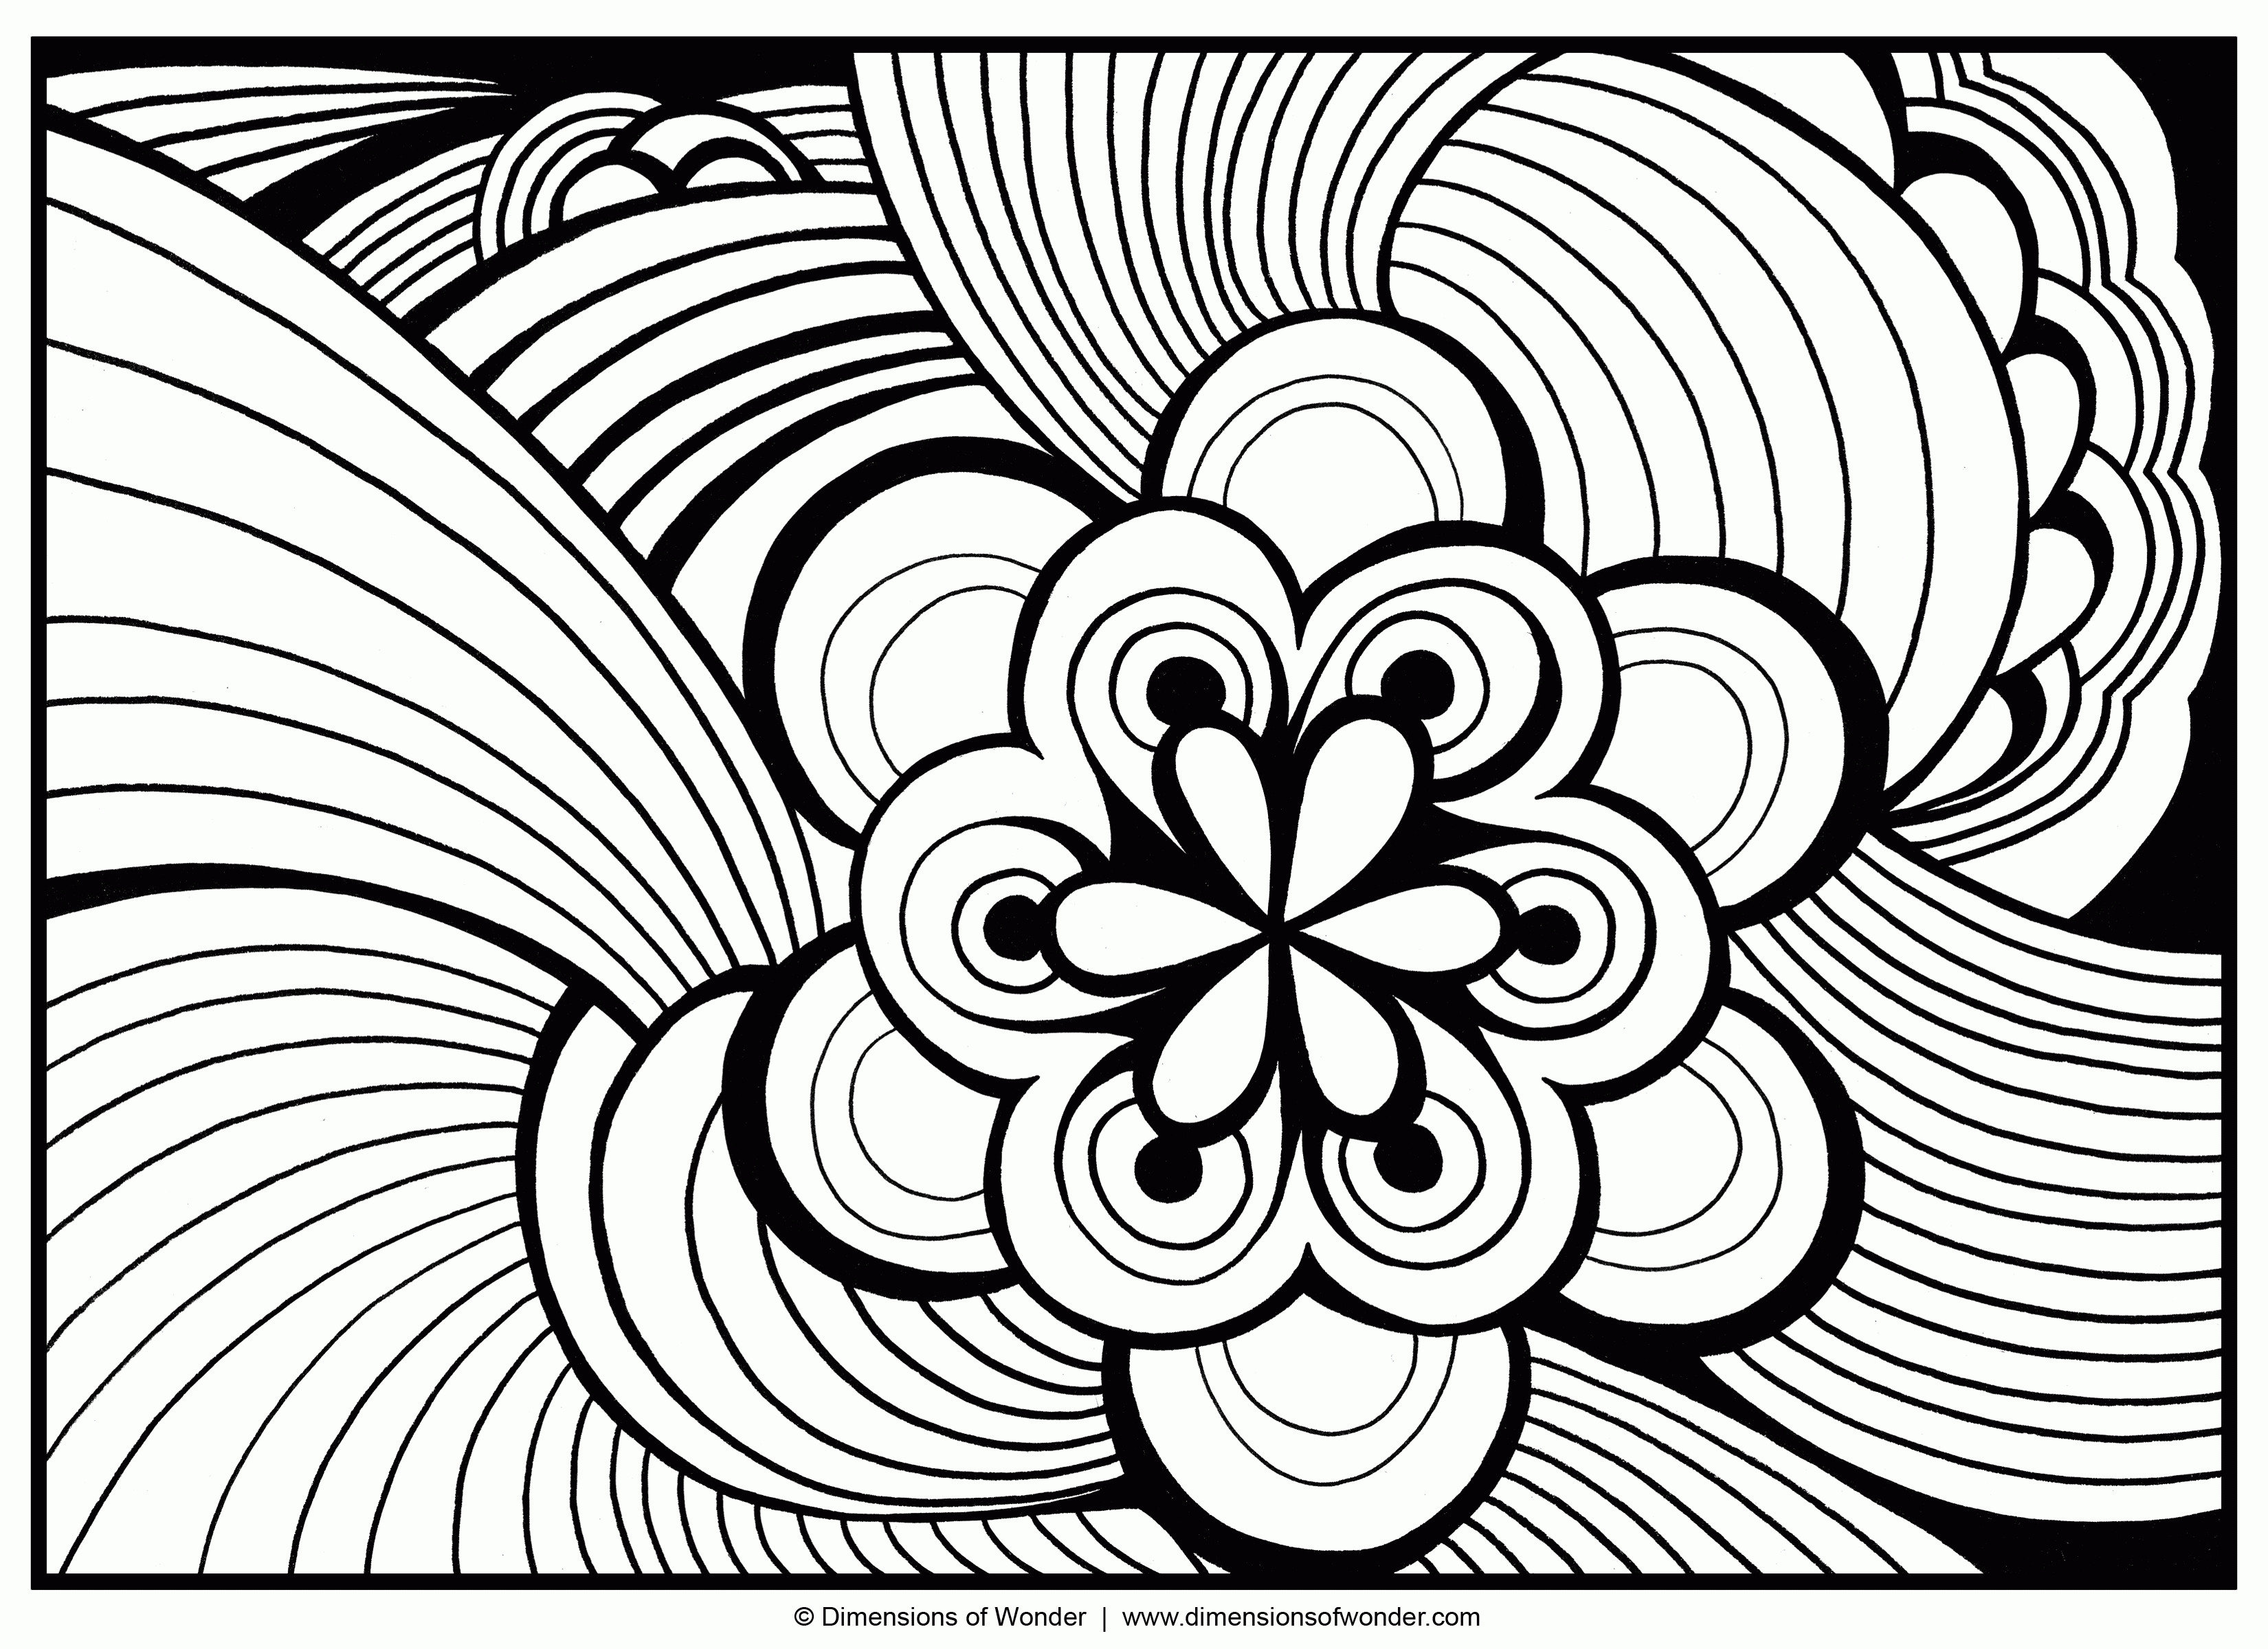 Coloring Pages Cool Designs Abstract Teenagers - Colorine.net | #6125